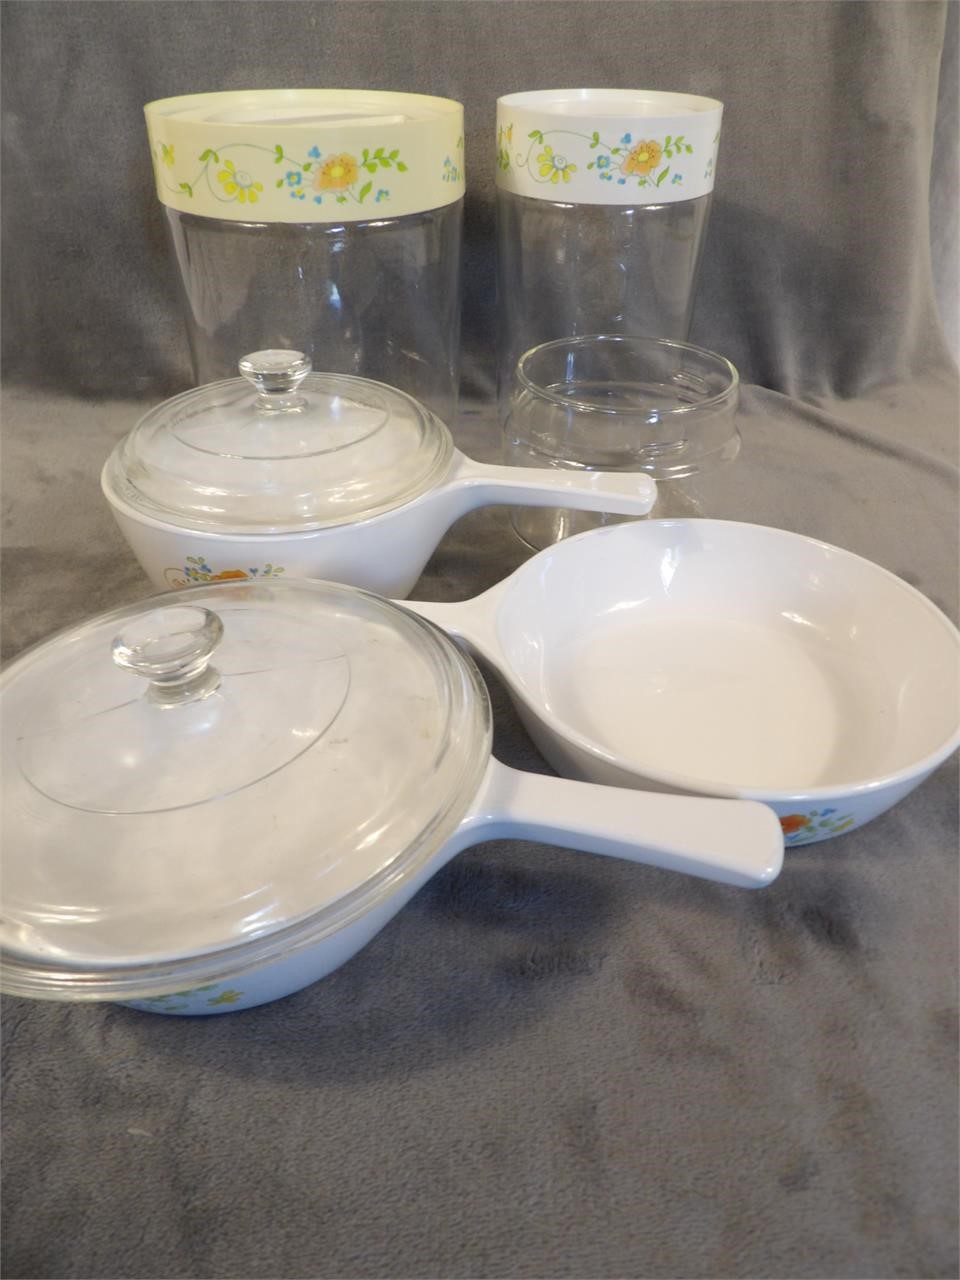 Pyrex Canisters and Corning Ware Handled dishes